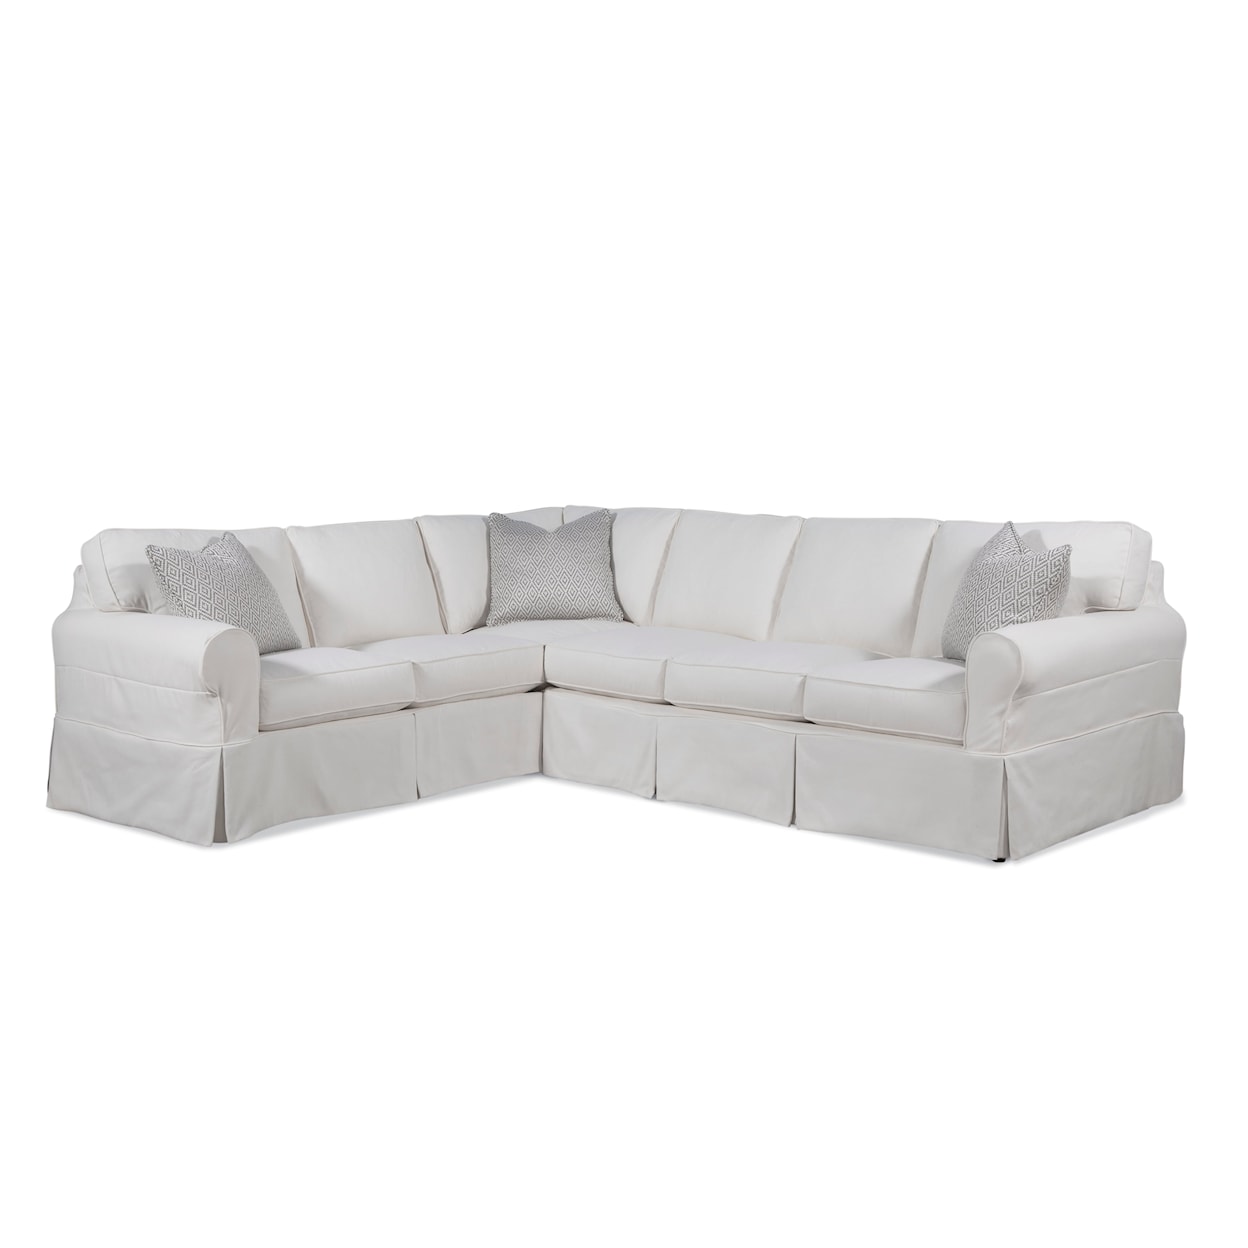 Braxton Culler Bedford Bedford Two-Piece Slipcover Sectional